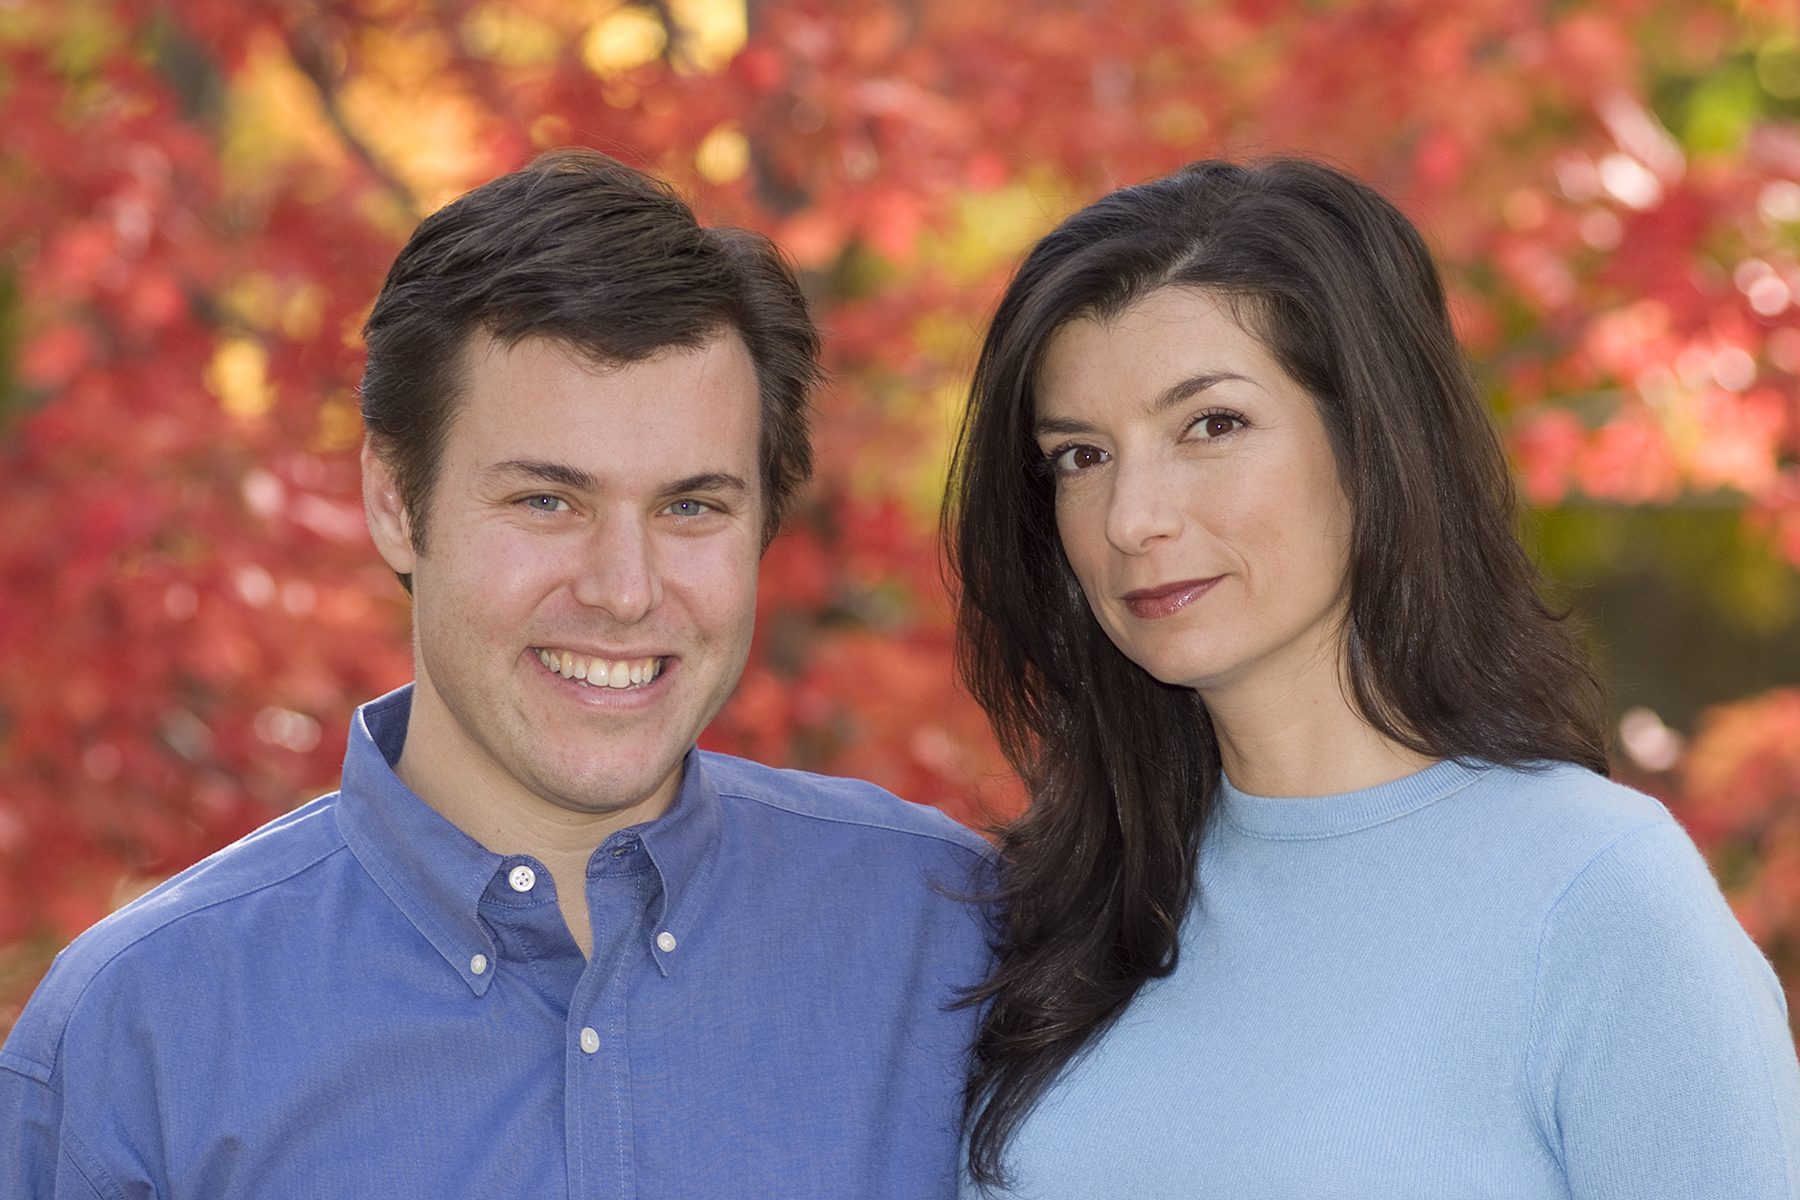 Rob Katz, CEO of Vail Resorts and his wife Elana Amsterdam. Photo: Vail Resorts. Vail Resorts Ceo Rob Katz Gives $2 Million in Grants to Support Mental & Behavioral Health Programs in Mountain Resort Communities across North America.